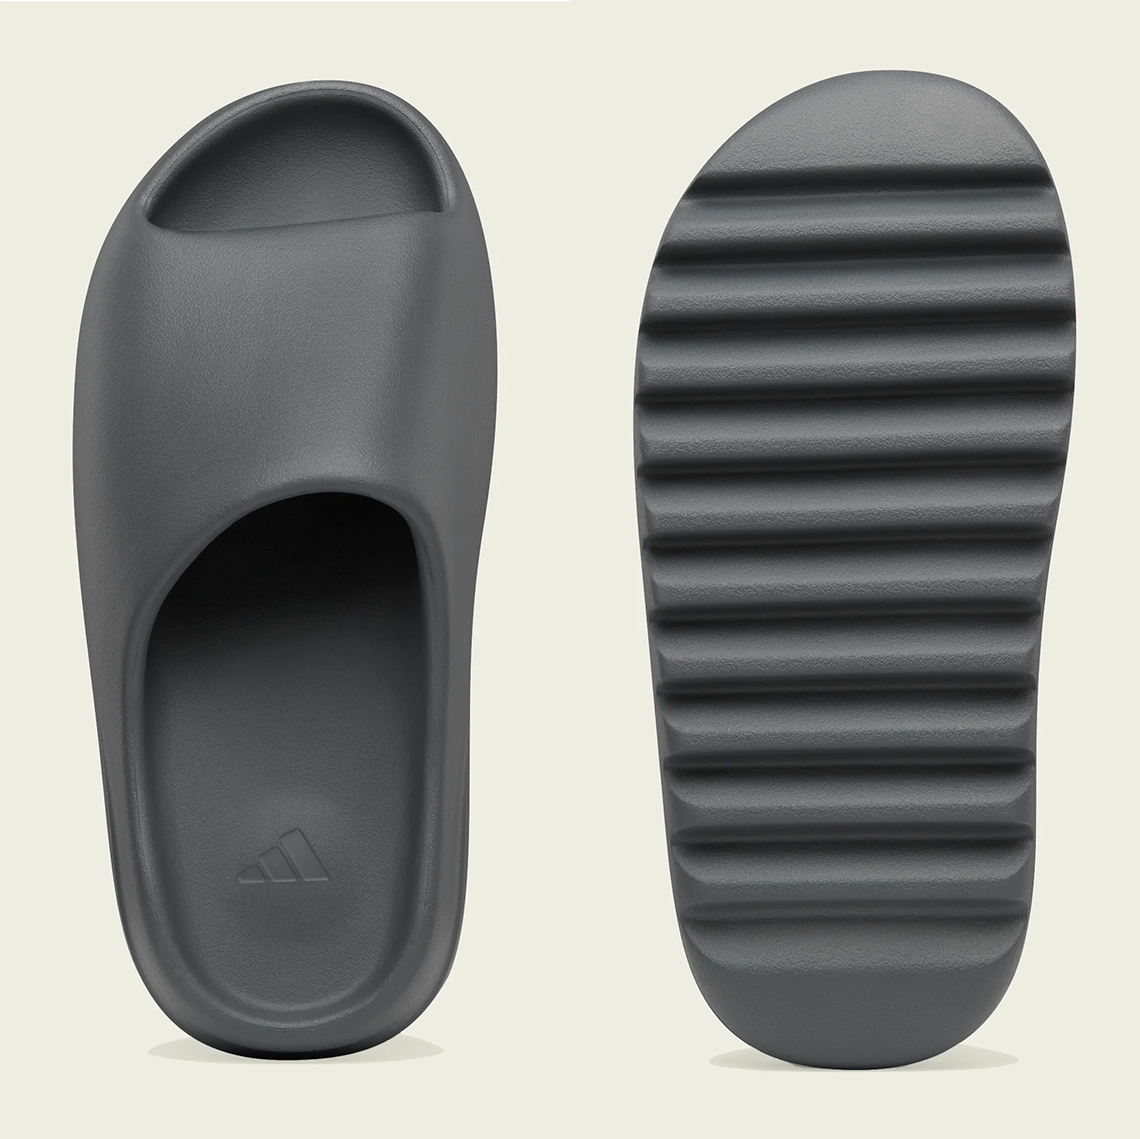 What are the purchasing options for the adidas Yeezy Slides in 